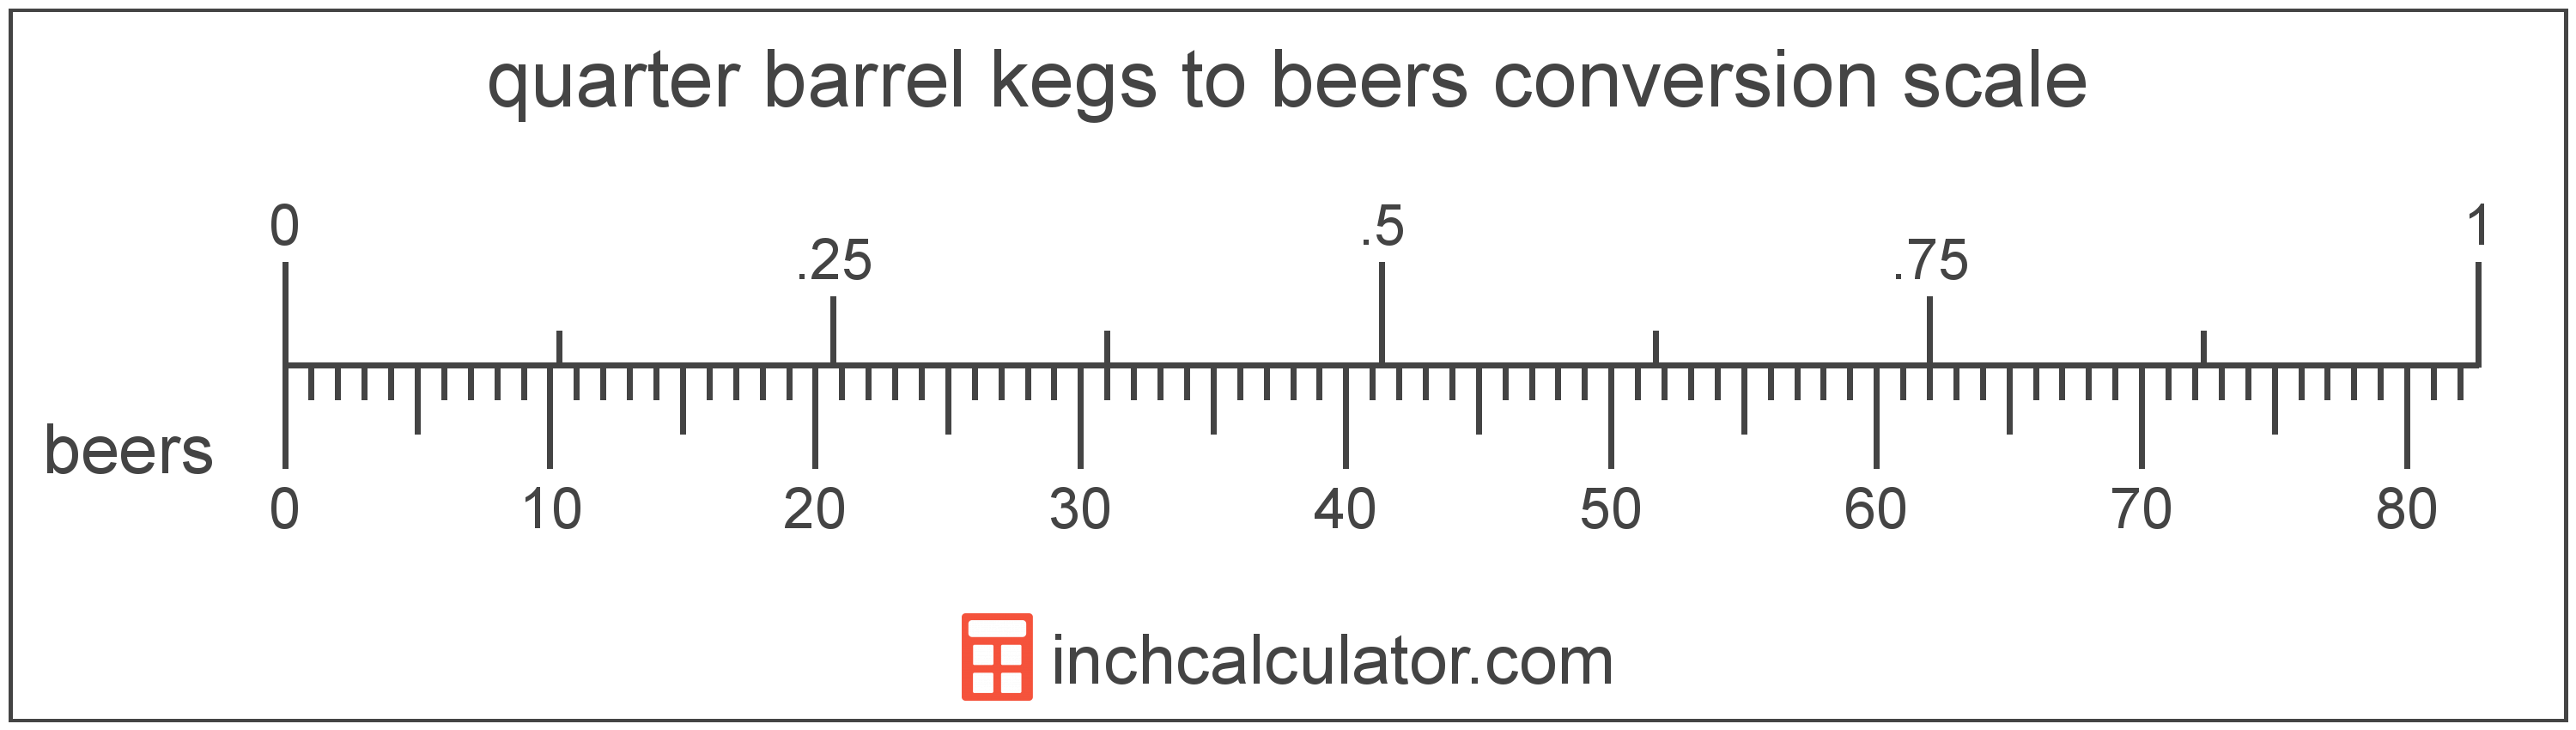 conversion scale showing quarter barrel kegs and equivalent beers beer volume values